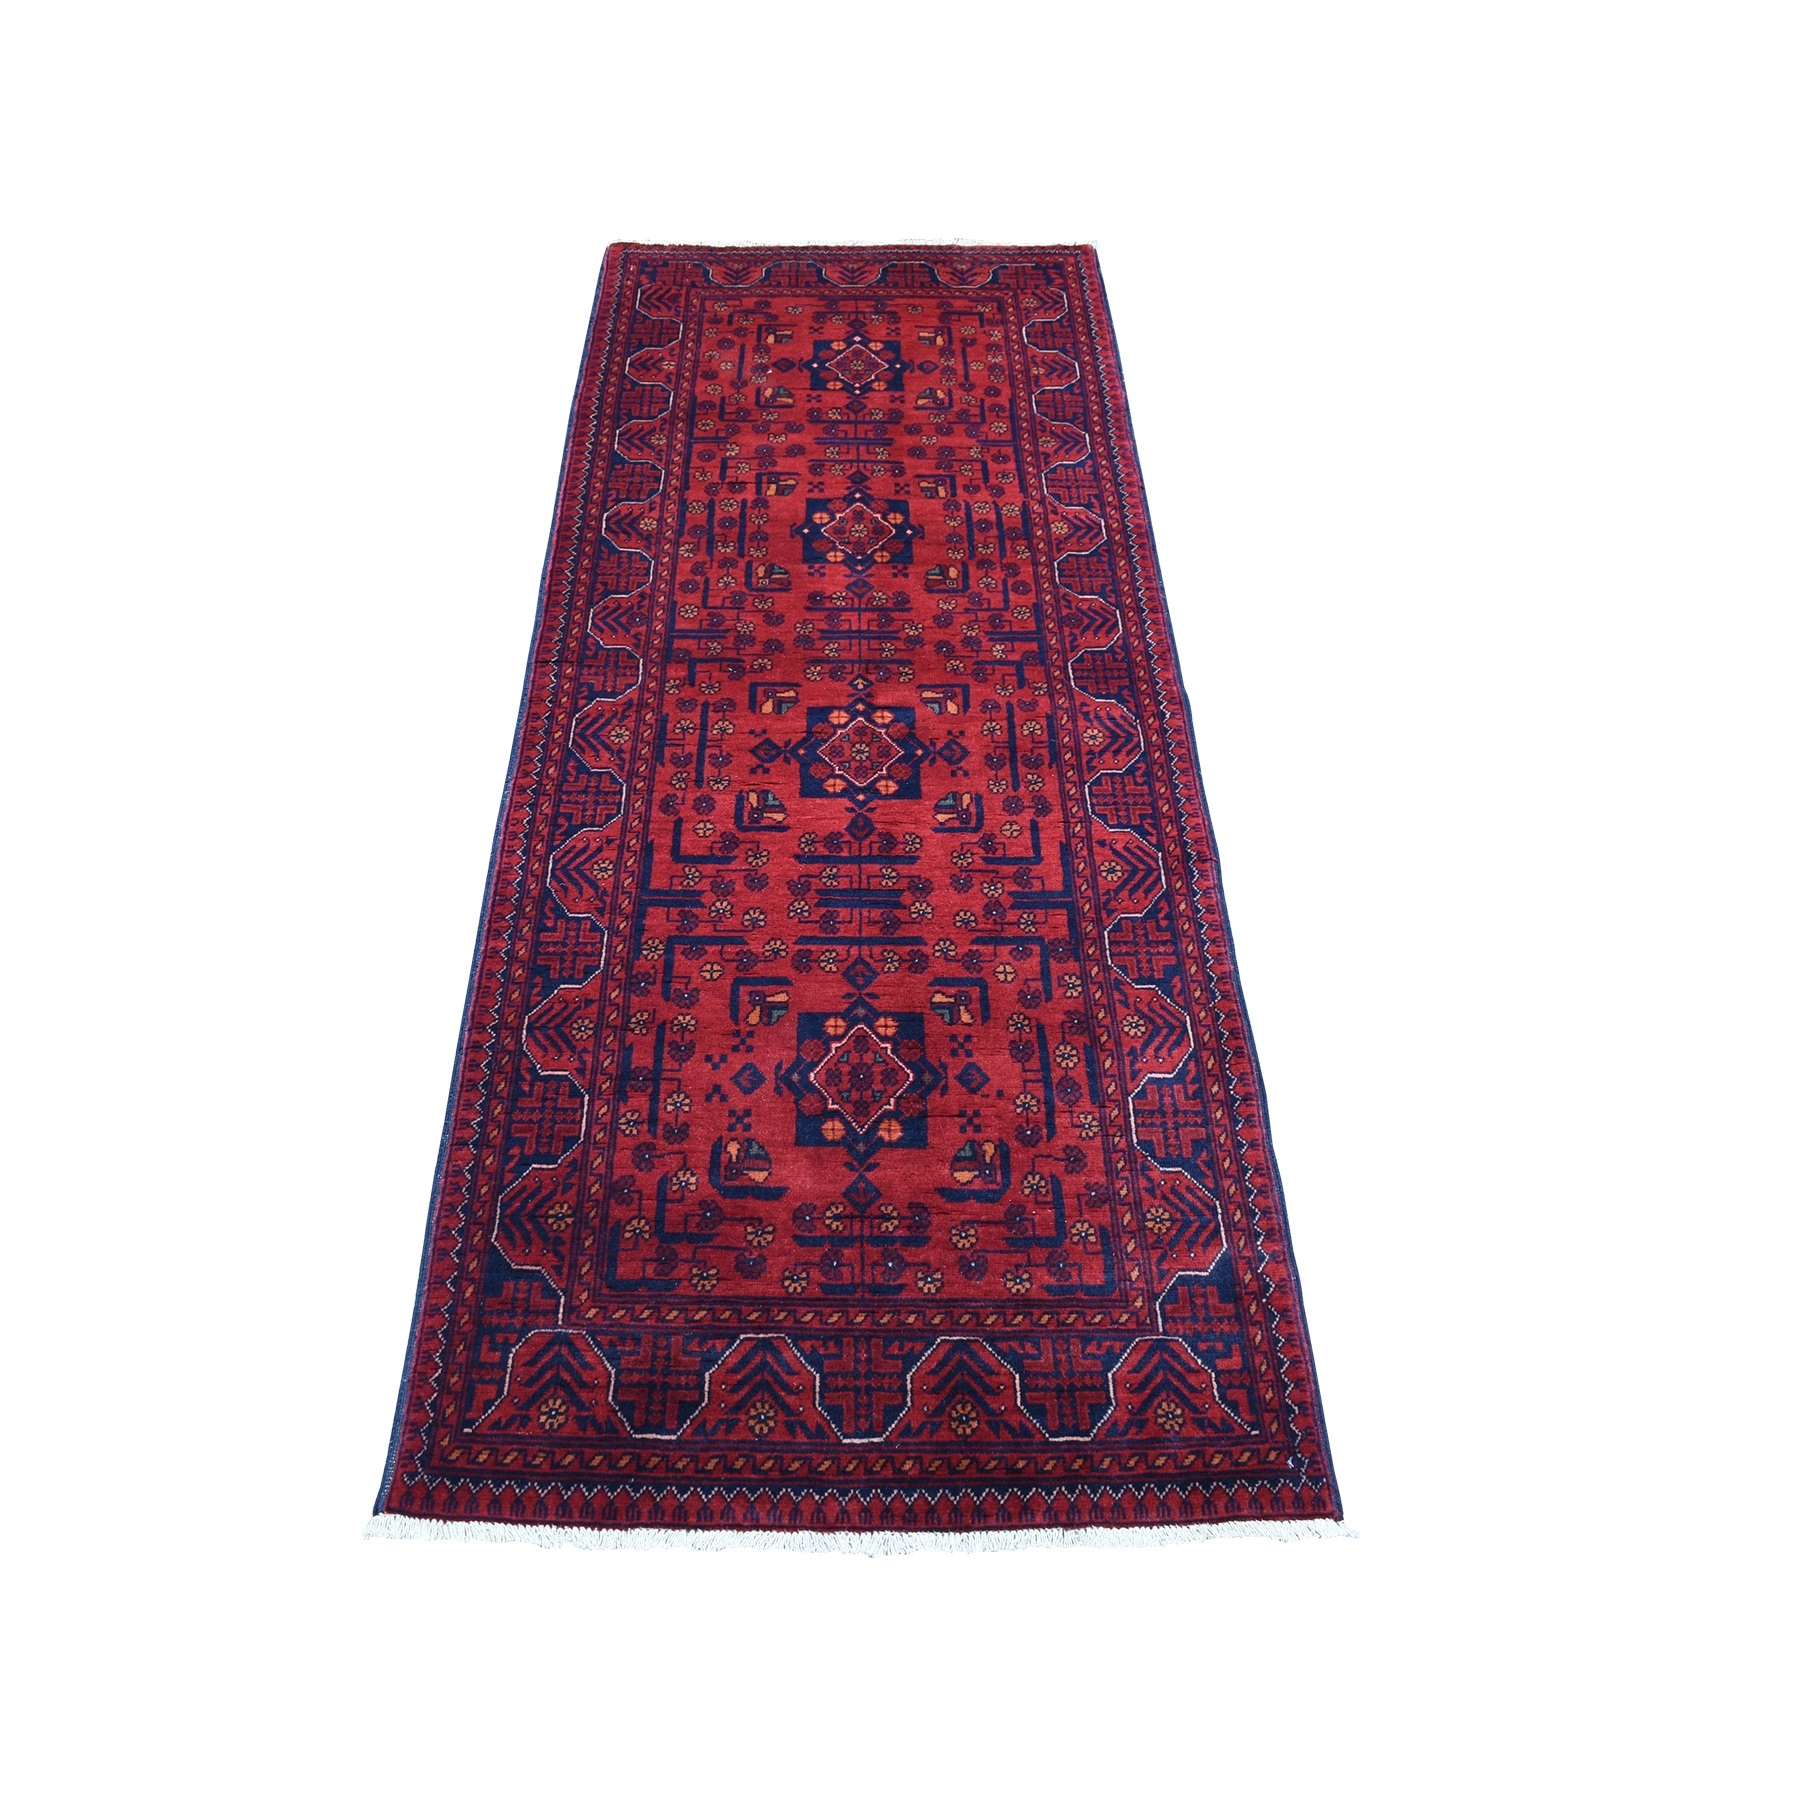 2'6"x6'5" Afghan Khamyab Tribal Design Hand Woven Deep and Saturated Red Extremely Durable Wool Runner Oriental Rug 